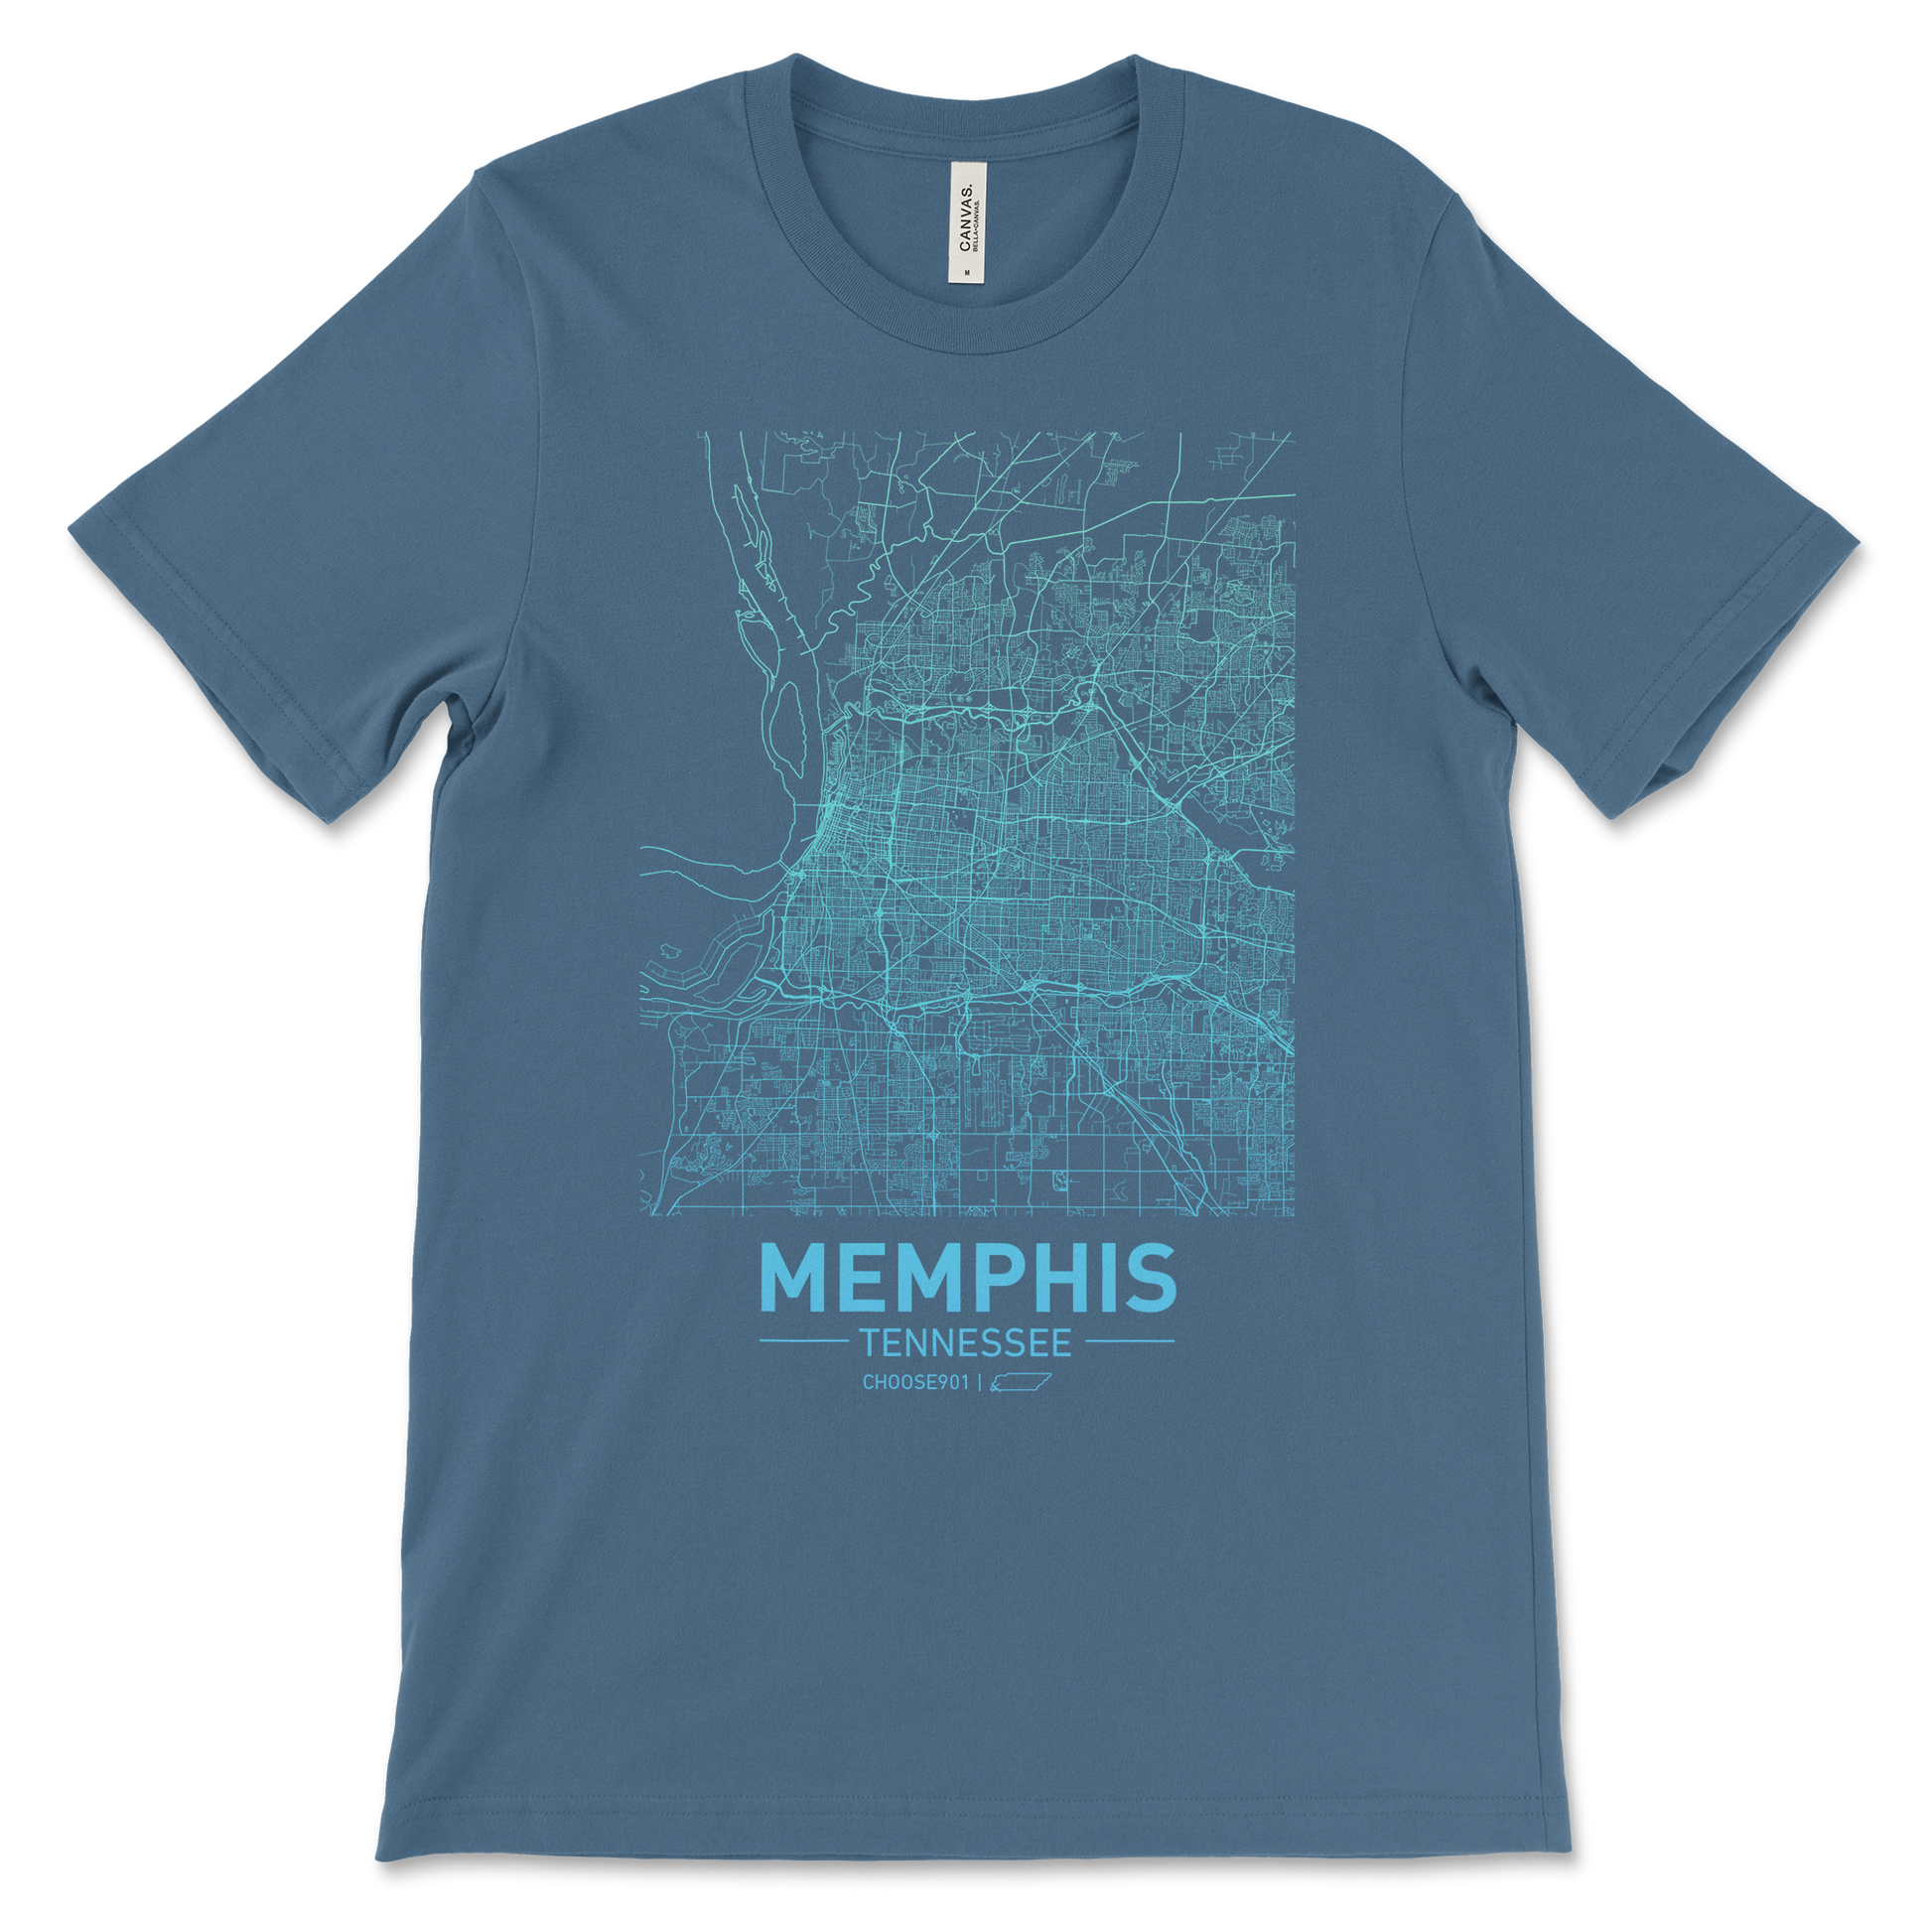 Cool Blue printed shirt featuring a white city map outline of Memphis and the text "Memphis Tennessee" displayed prominently at the bottom.